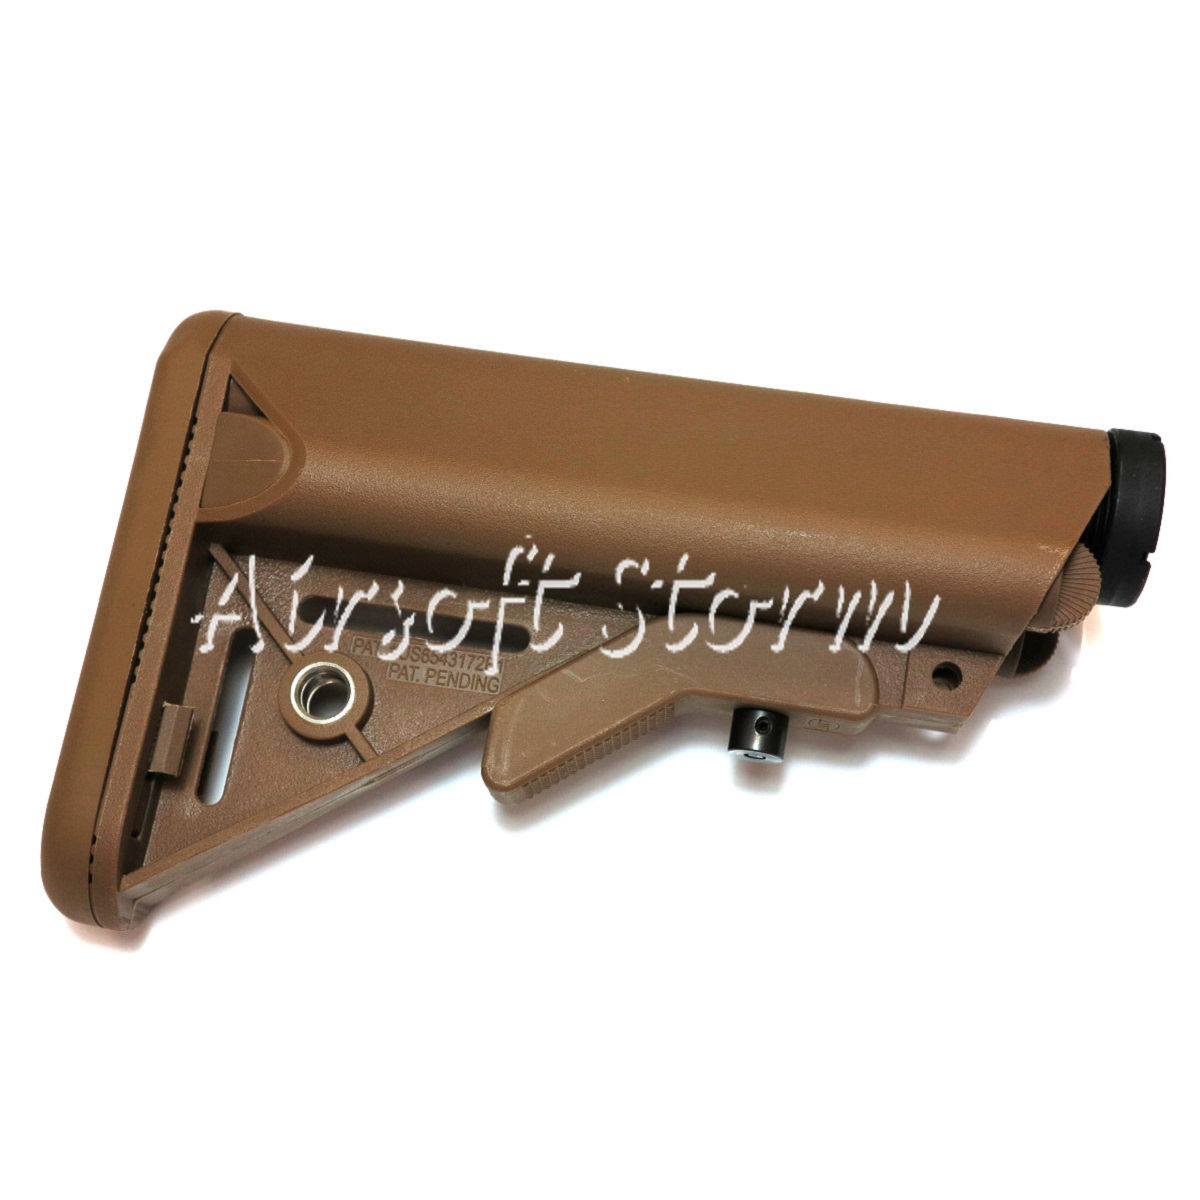 Airsoft Tactical Gear Army Force Special Force Crane Stock for M4 / M16 Tan